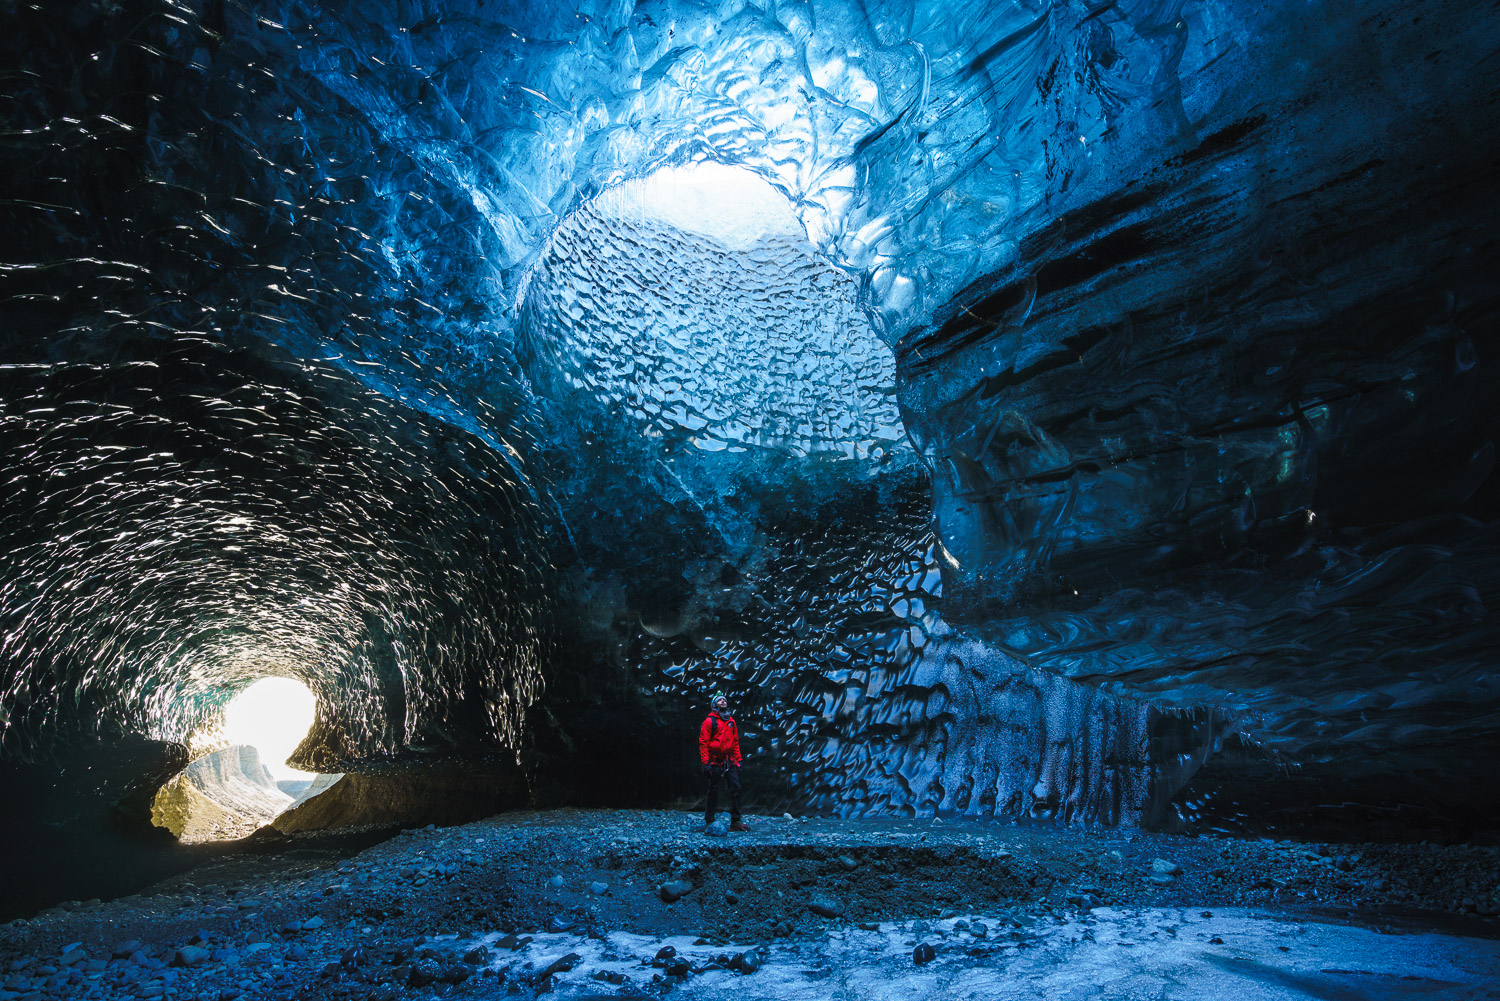 Iceland Ice Cave Tour